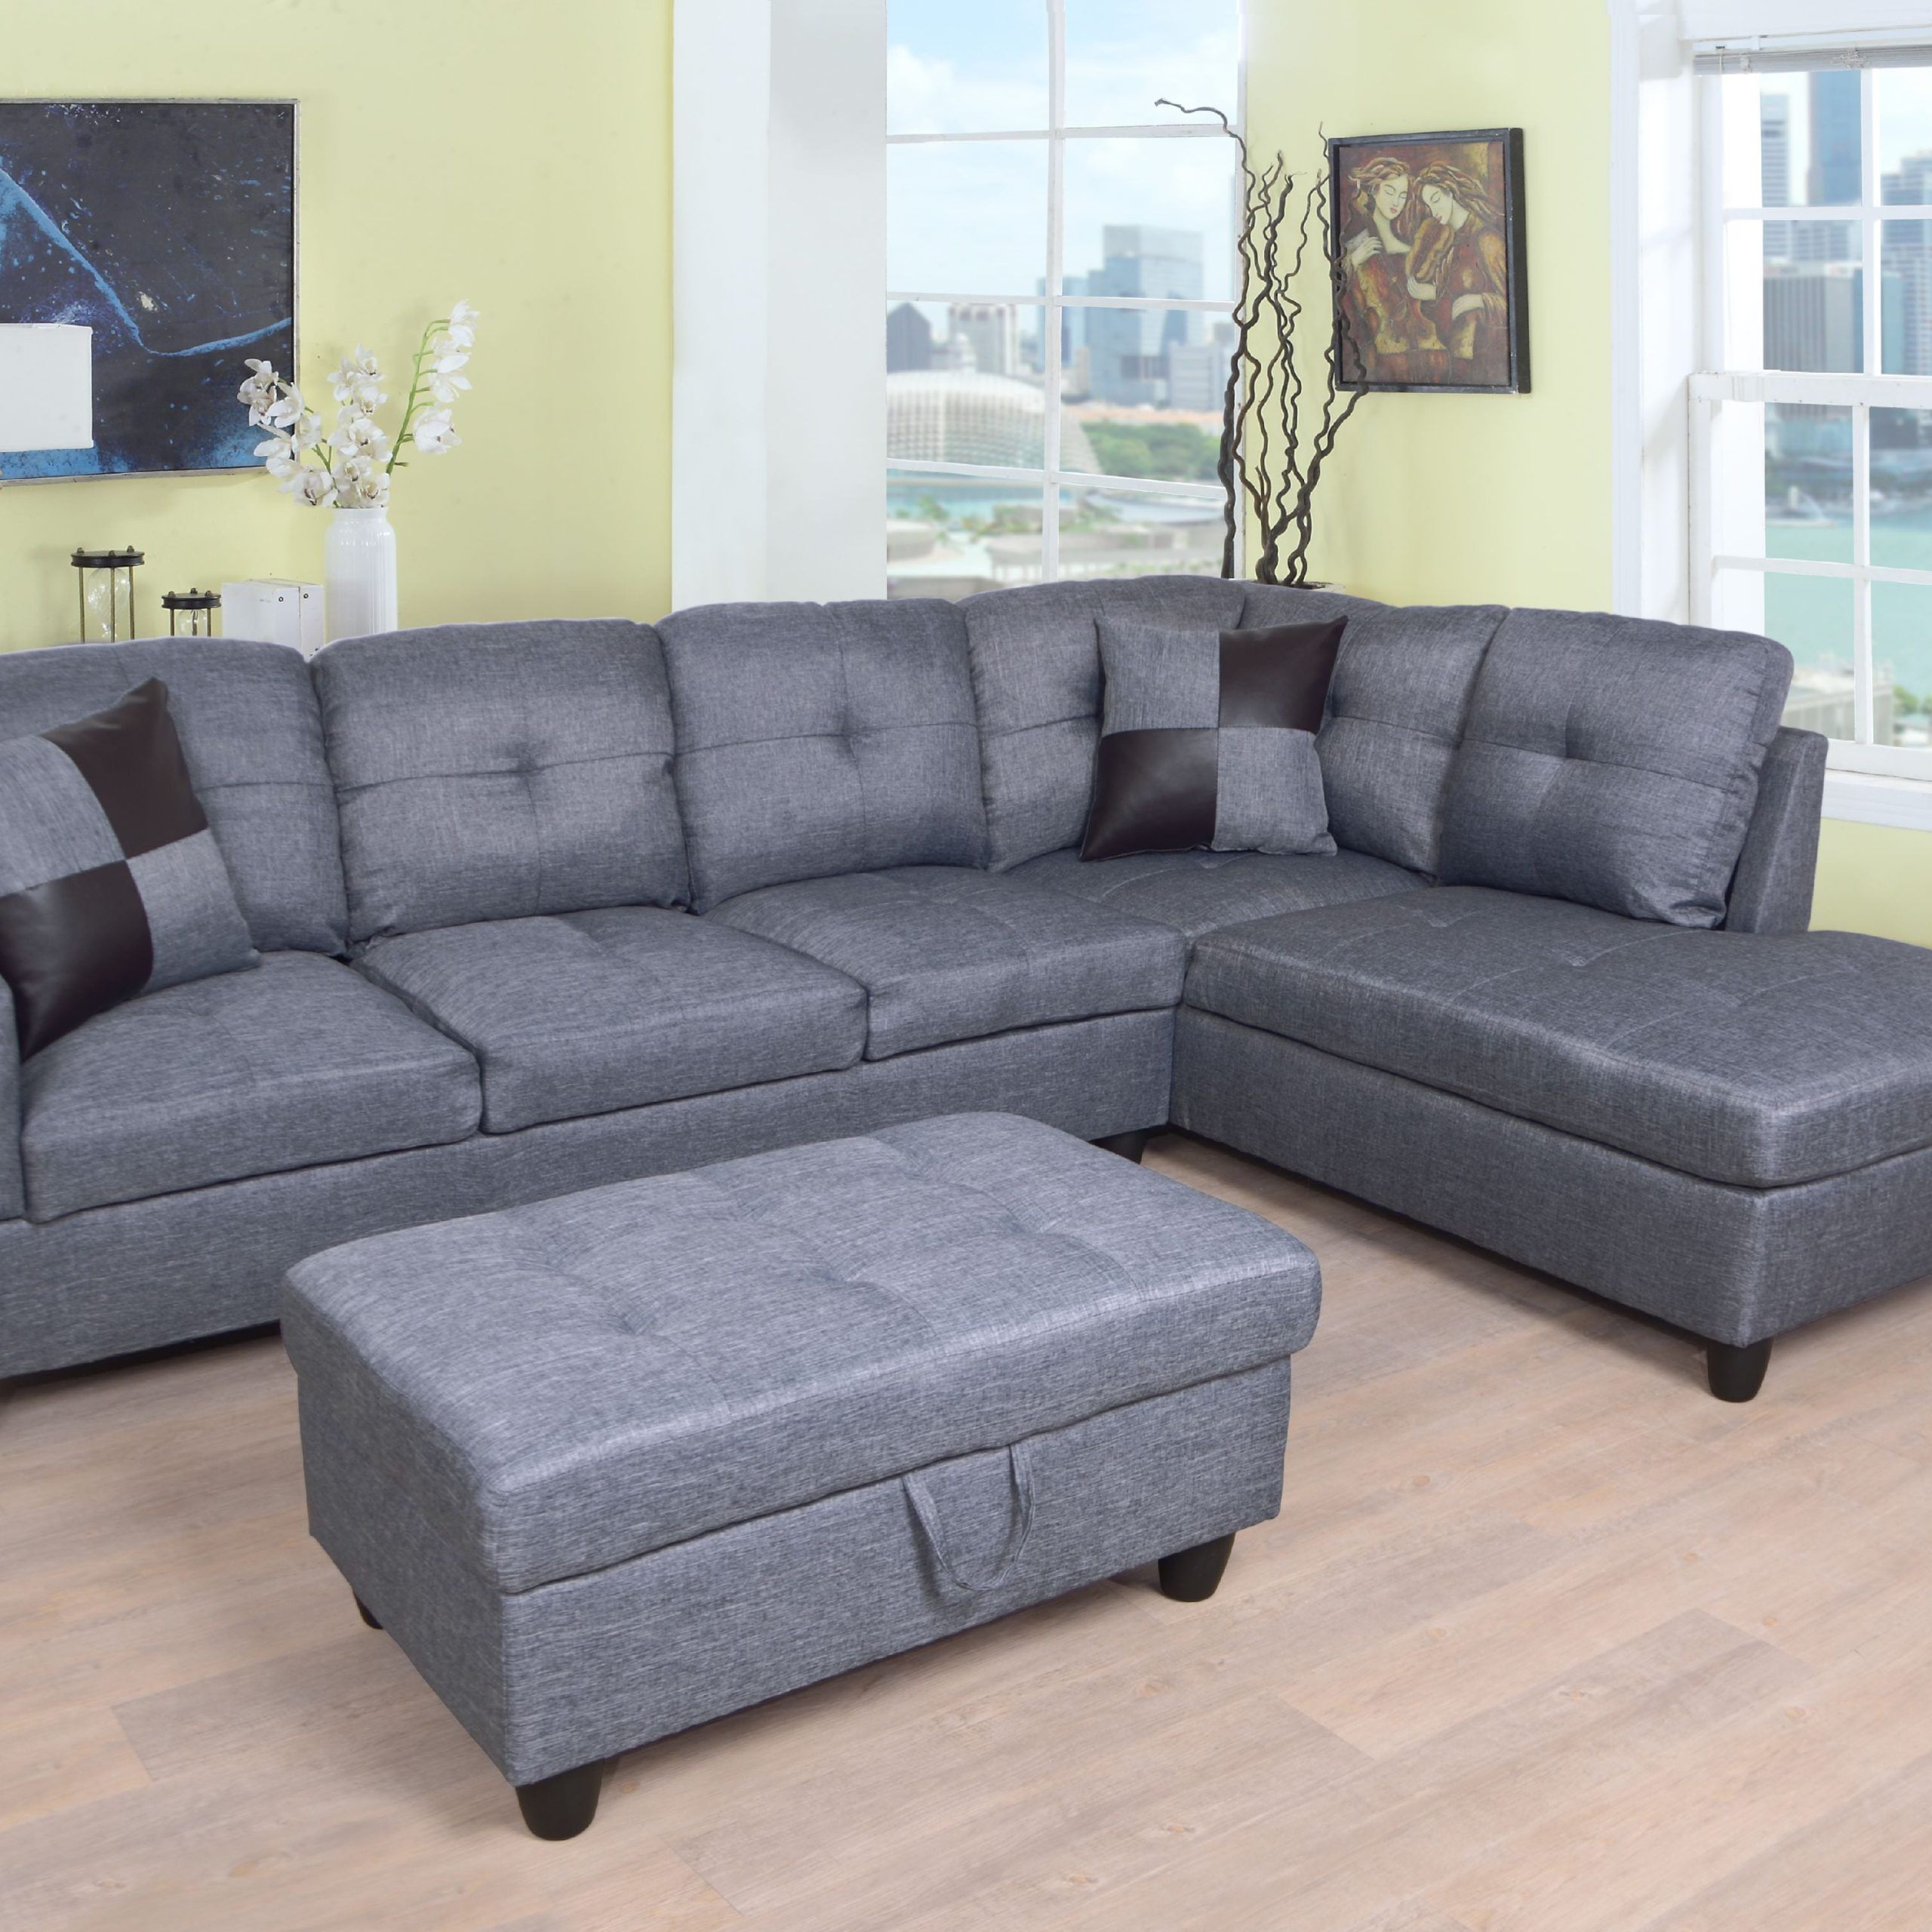 Sam Left Facing Sectional Sofa With Ottoman, Grey – Walmart With Sofas With Ottomans (Gallery 6 of 20)